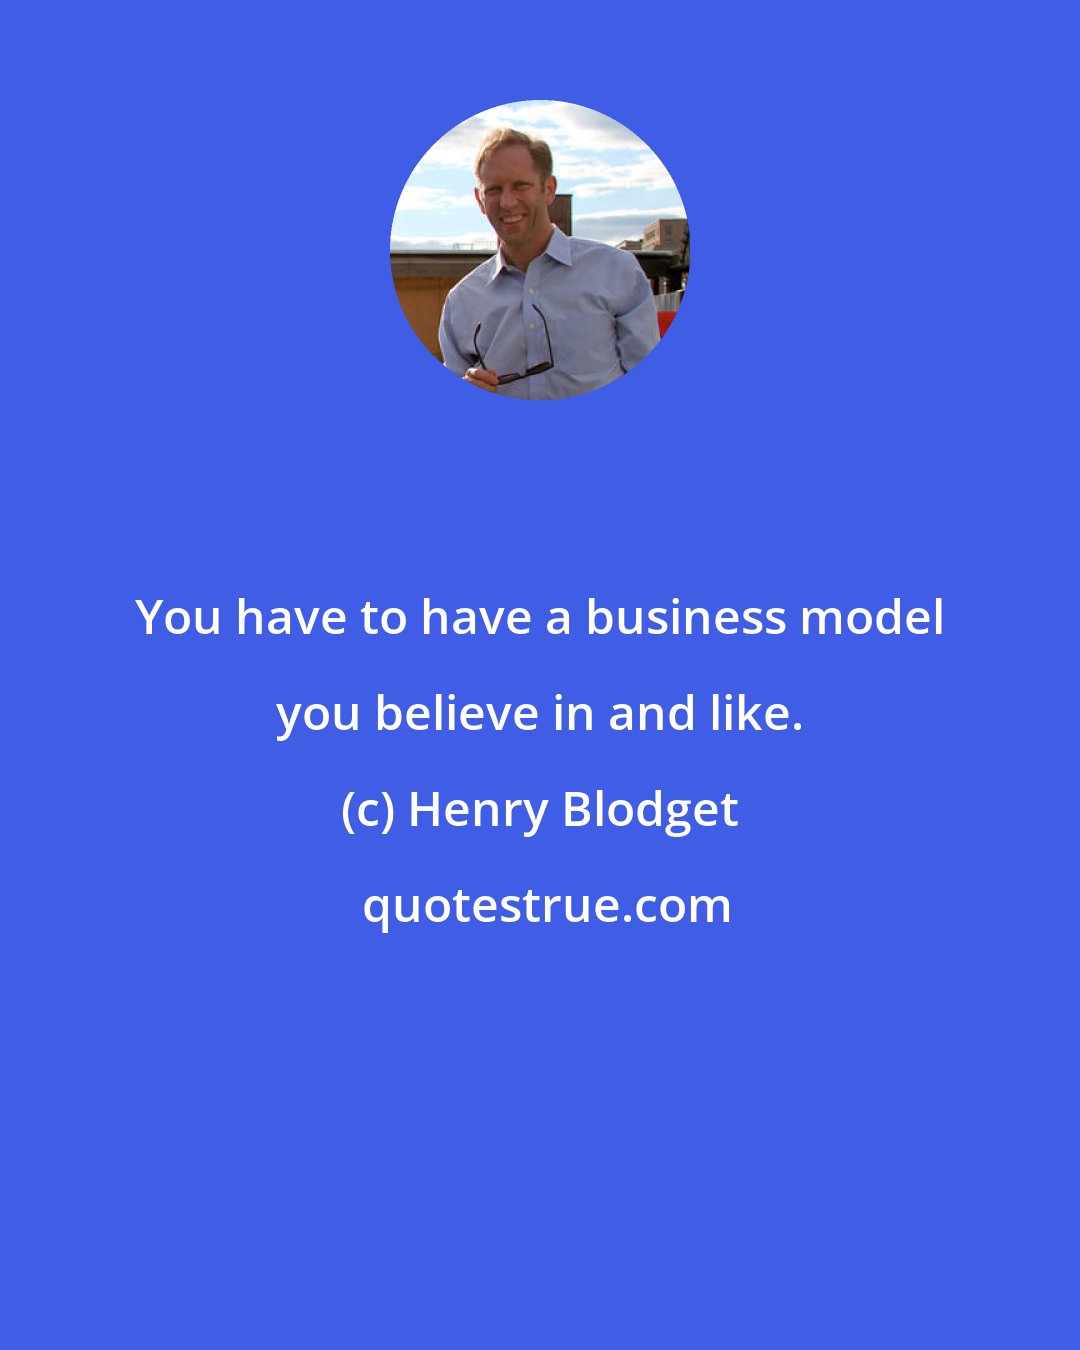 Henry Blodget: You have to have a business model you believe in and like.